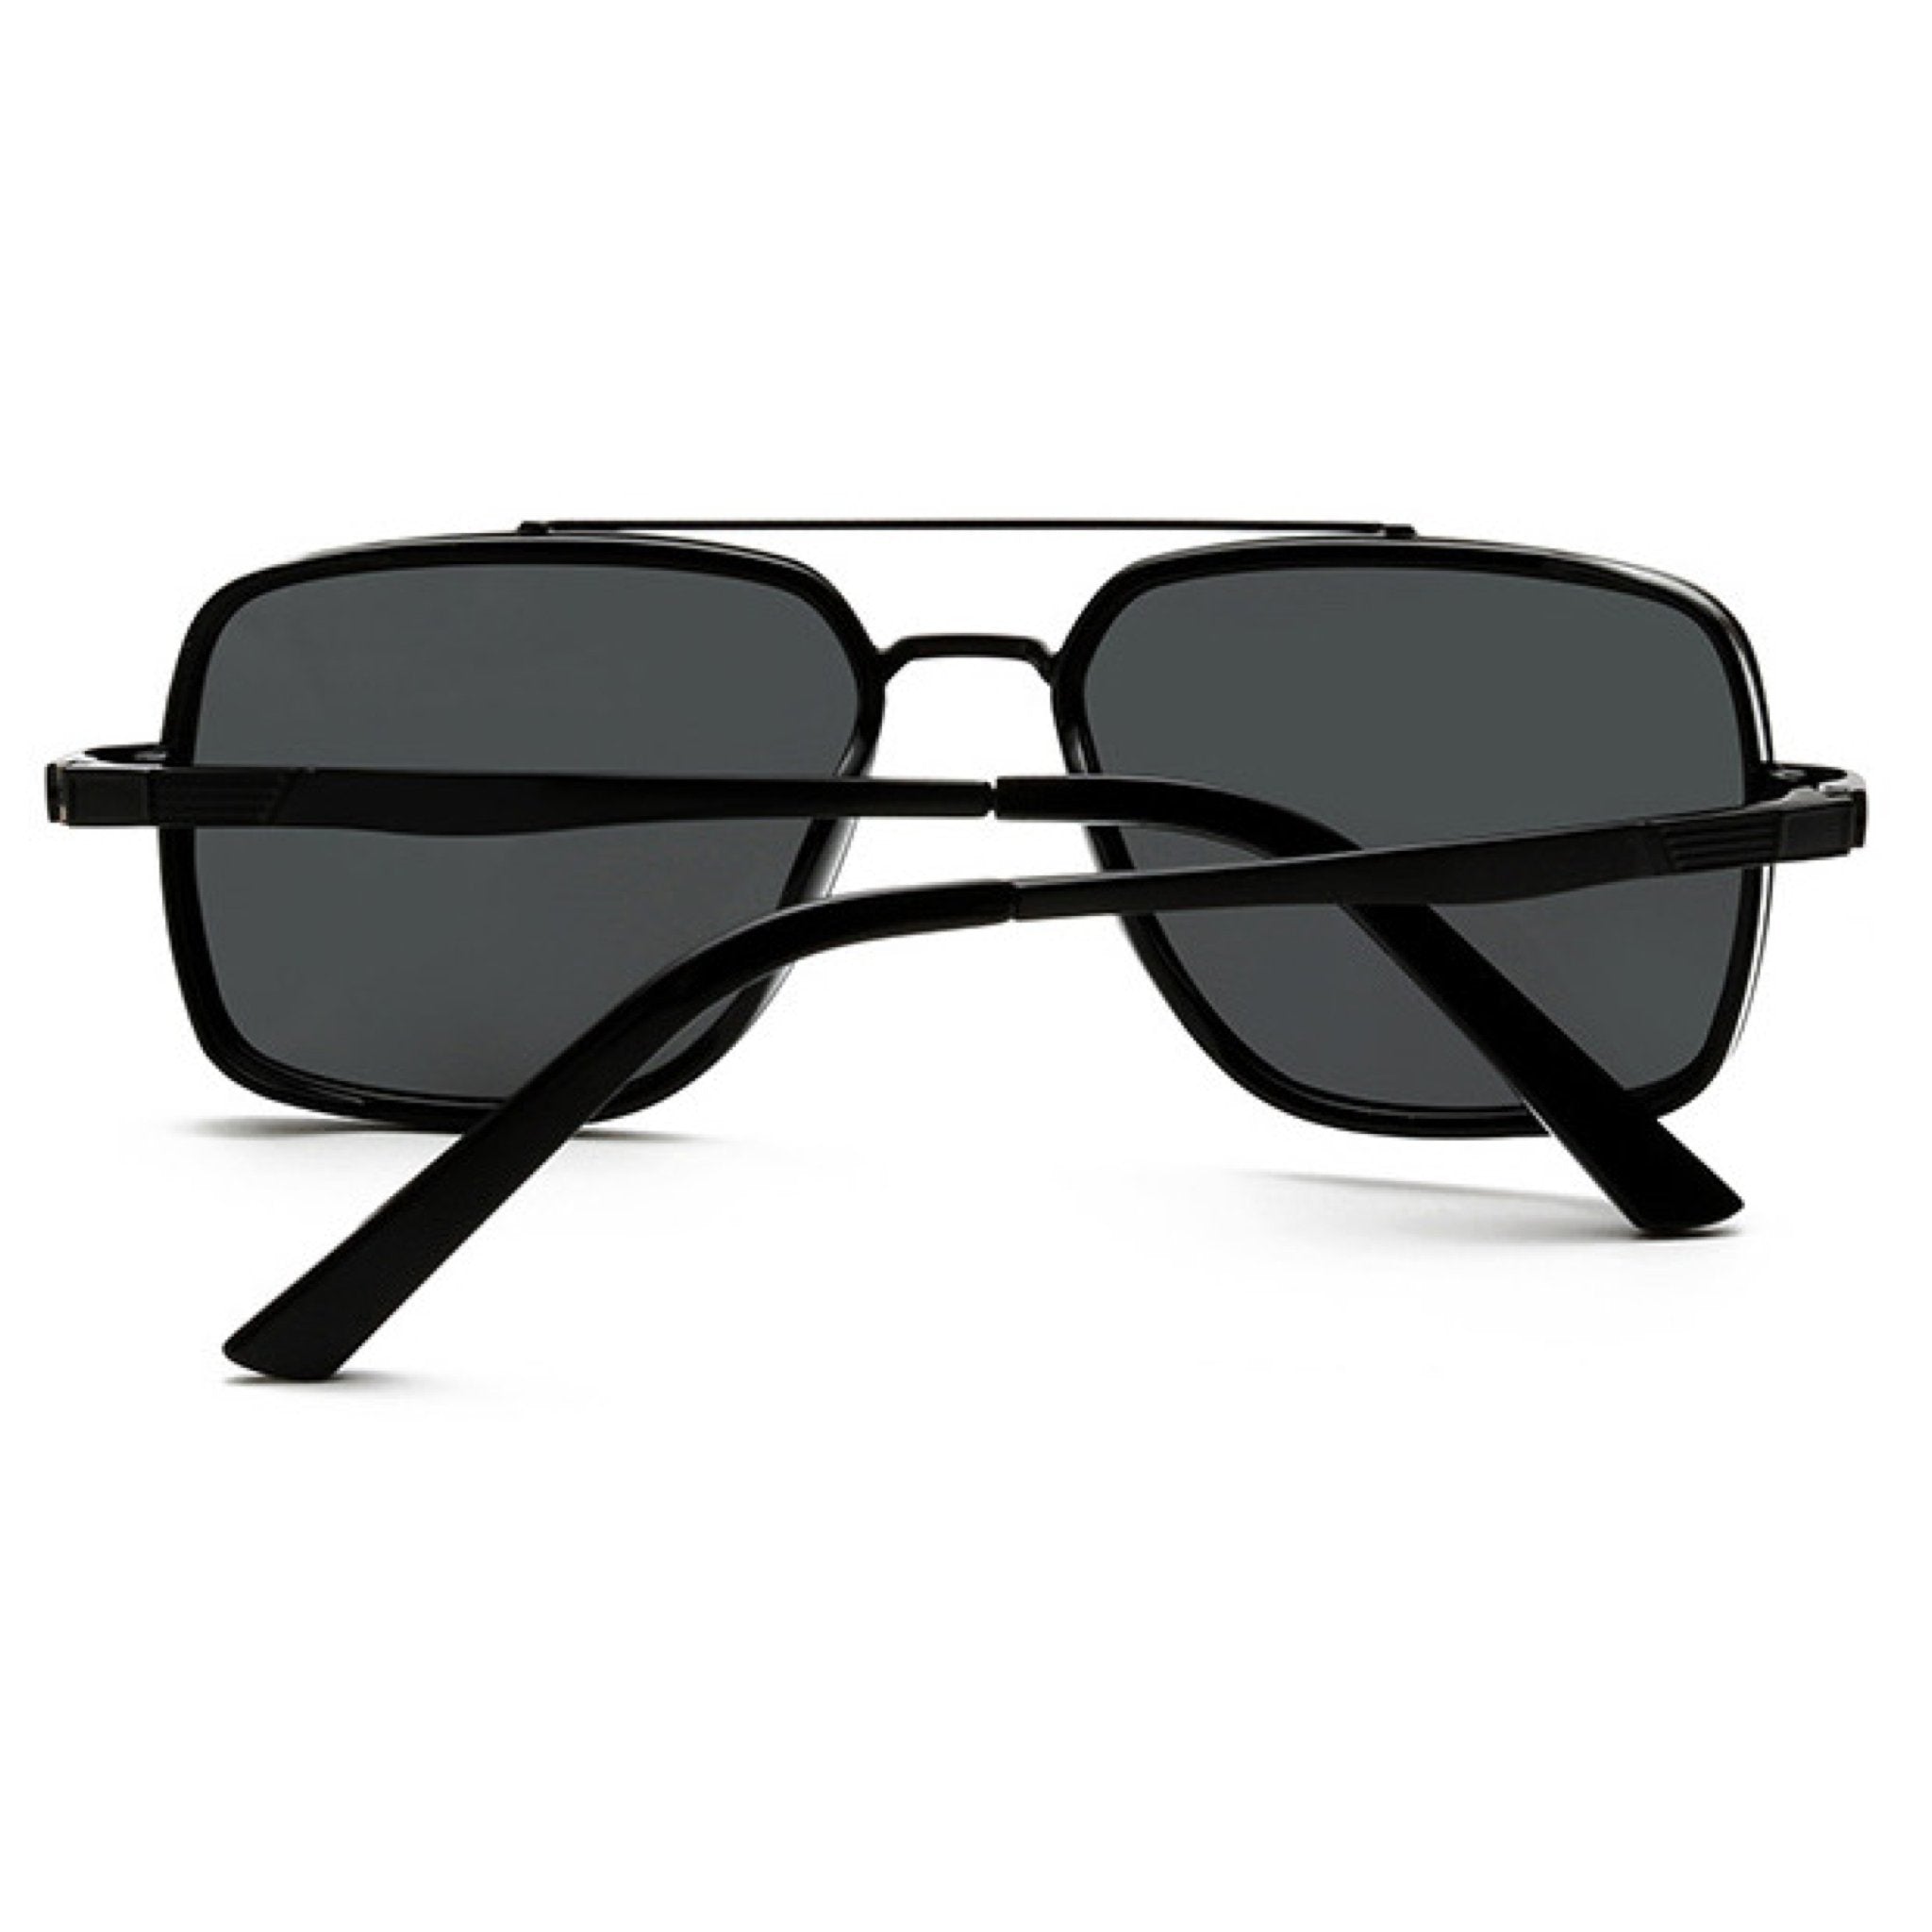 Athena - Unisex Sunglasses (PRE-ORDER DISPATCH DATE 25 DECEMBER 2023) - Sarman Fashion - Wholesale Clothing Fashion Brand for Men from Canada